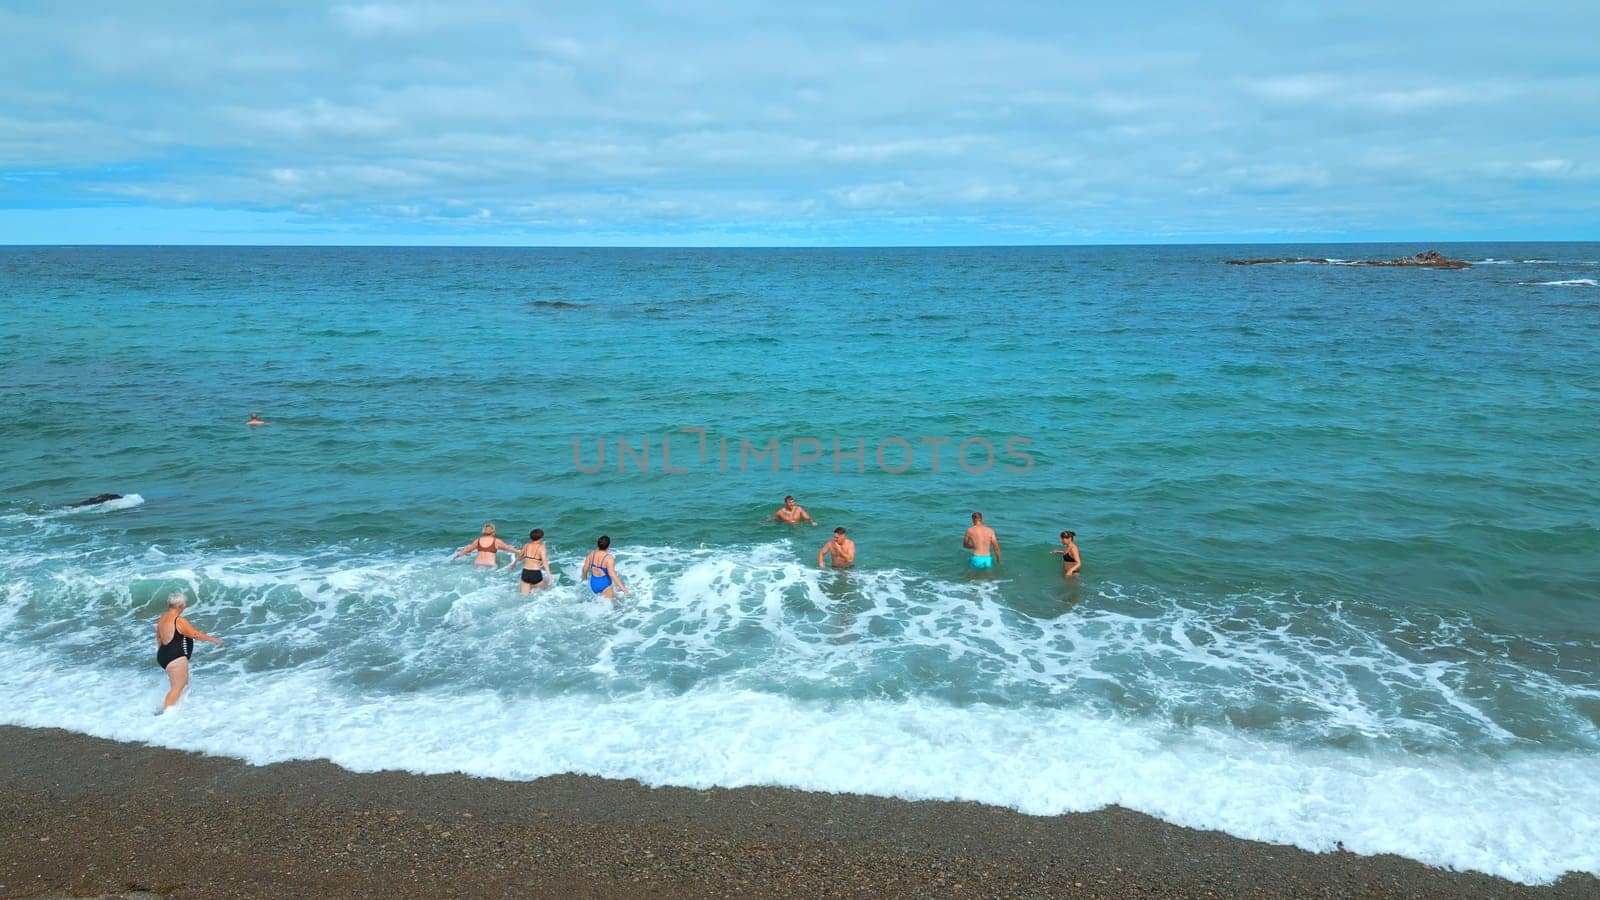 Top view of people swimming in blue water on cloudy day. Clip. Beautiful blue sea with waves and floating people. Tourists swim and relax on beautiful sea with blue water.